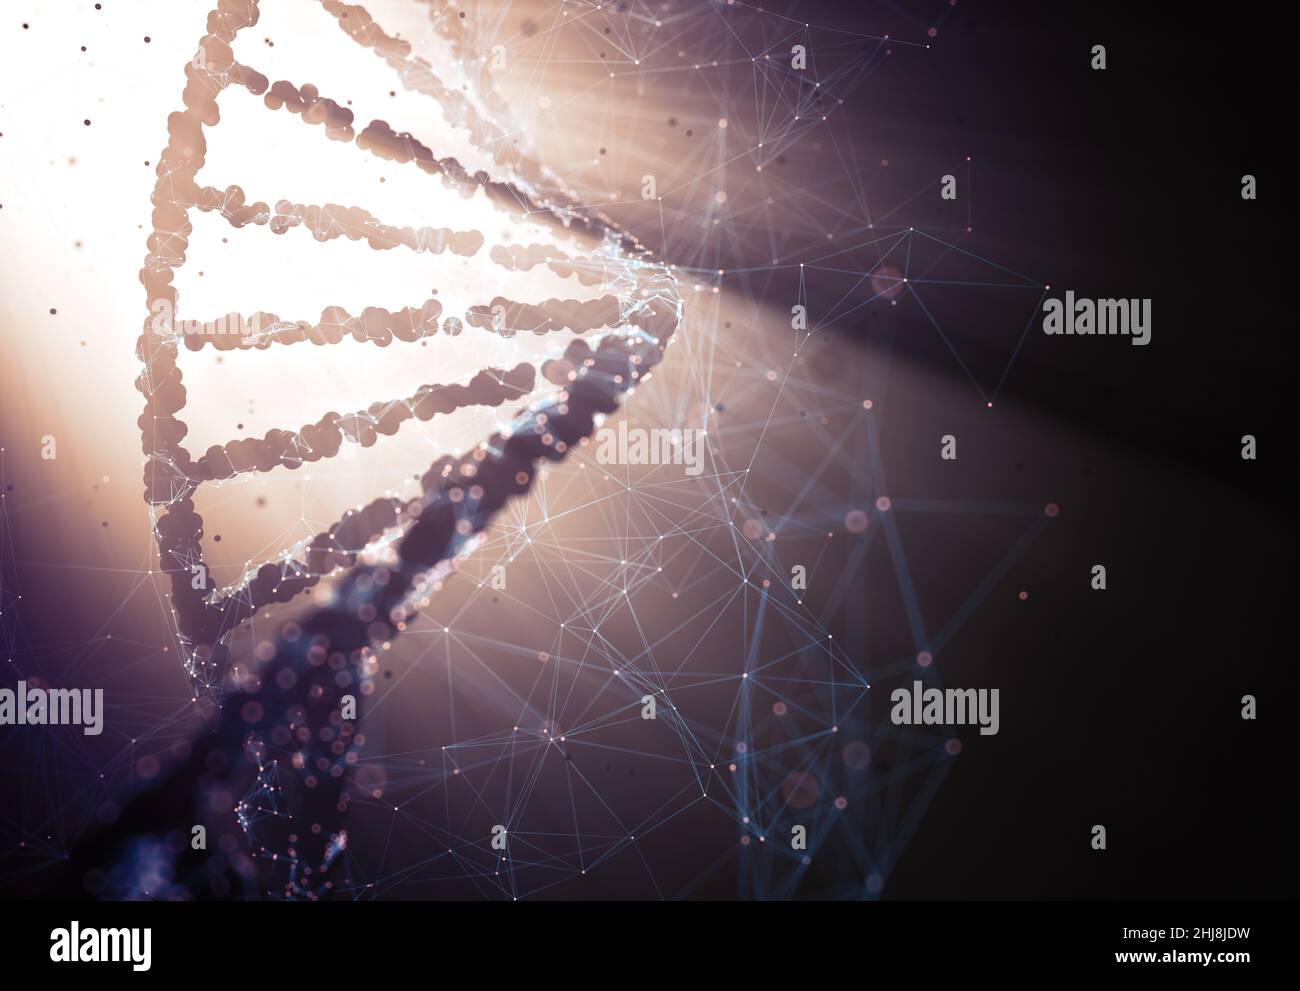 Biotechnology and molecular genetic engineering. 3D illustration of science and molecular technology. Stock Photo